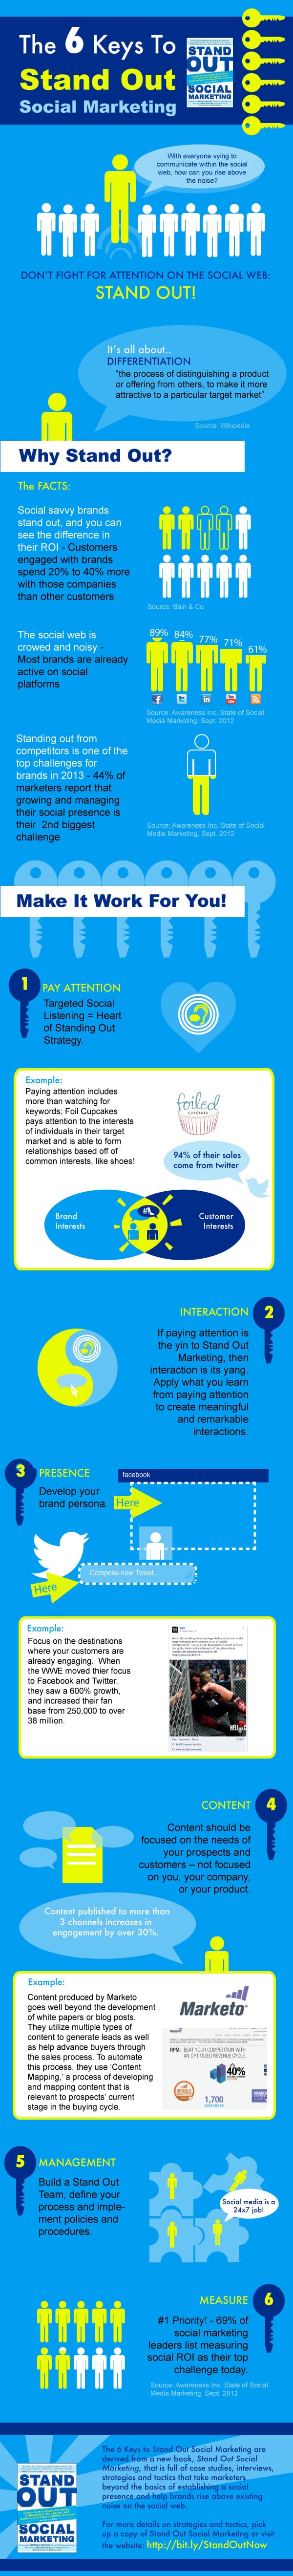 getting-noticed-social-networking-infographic